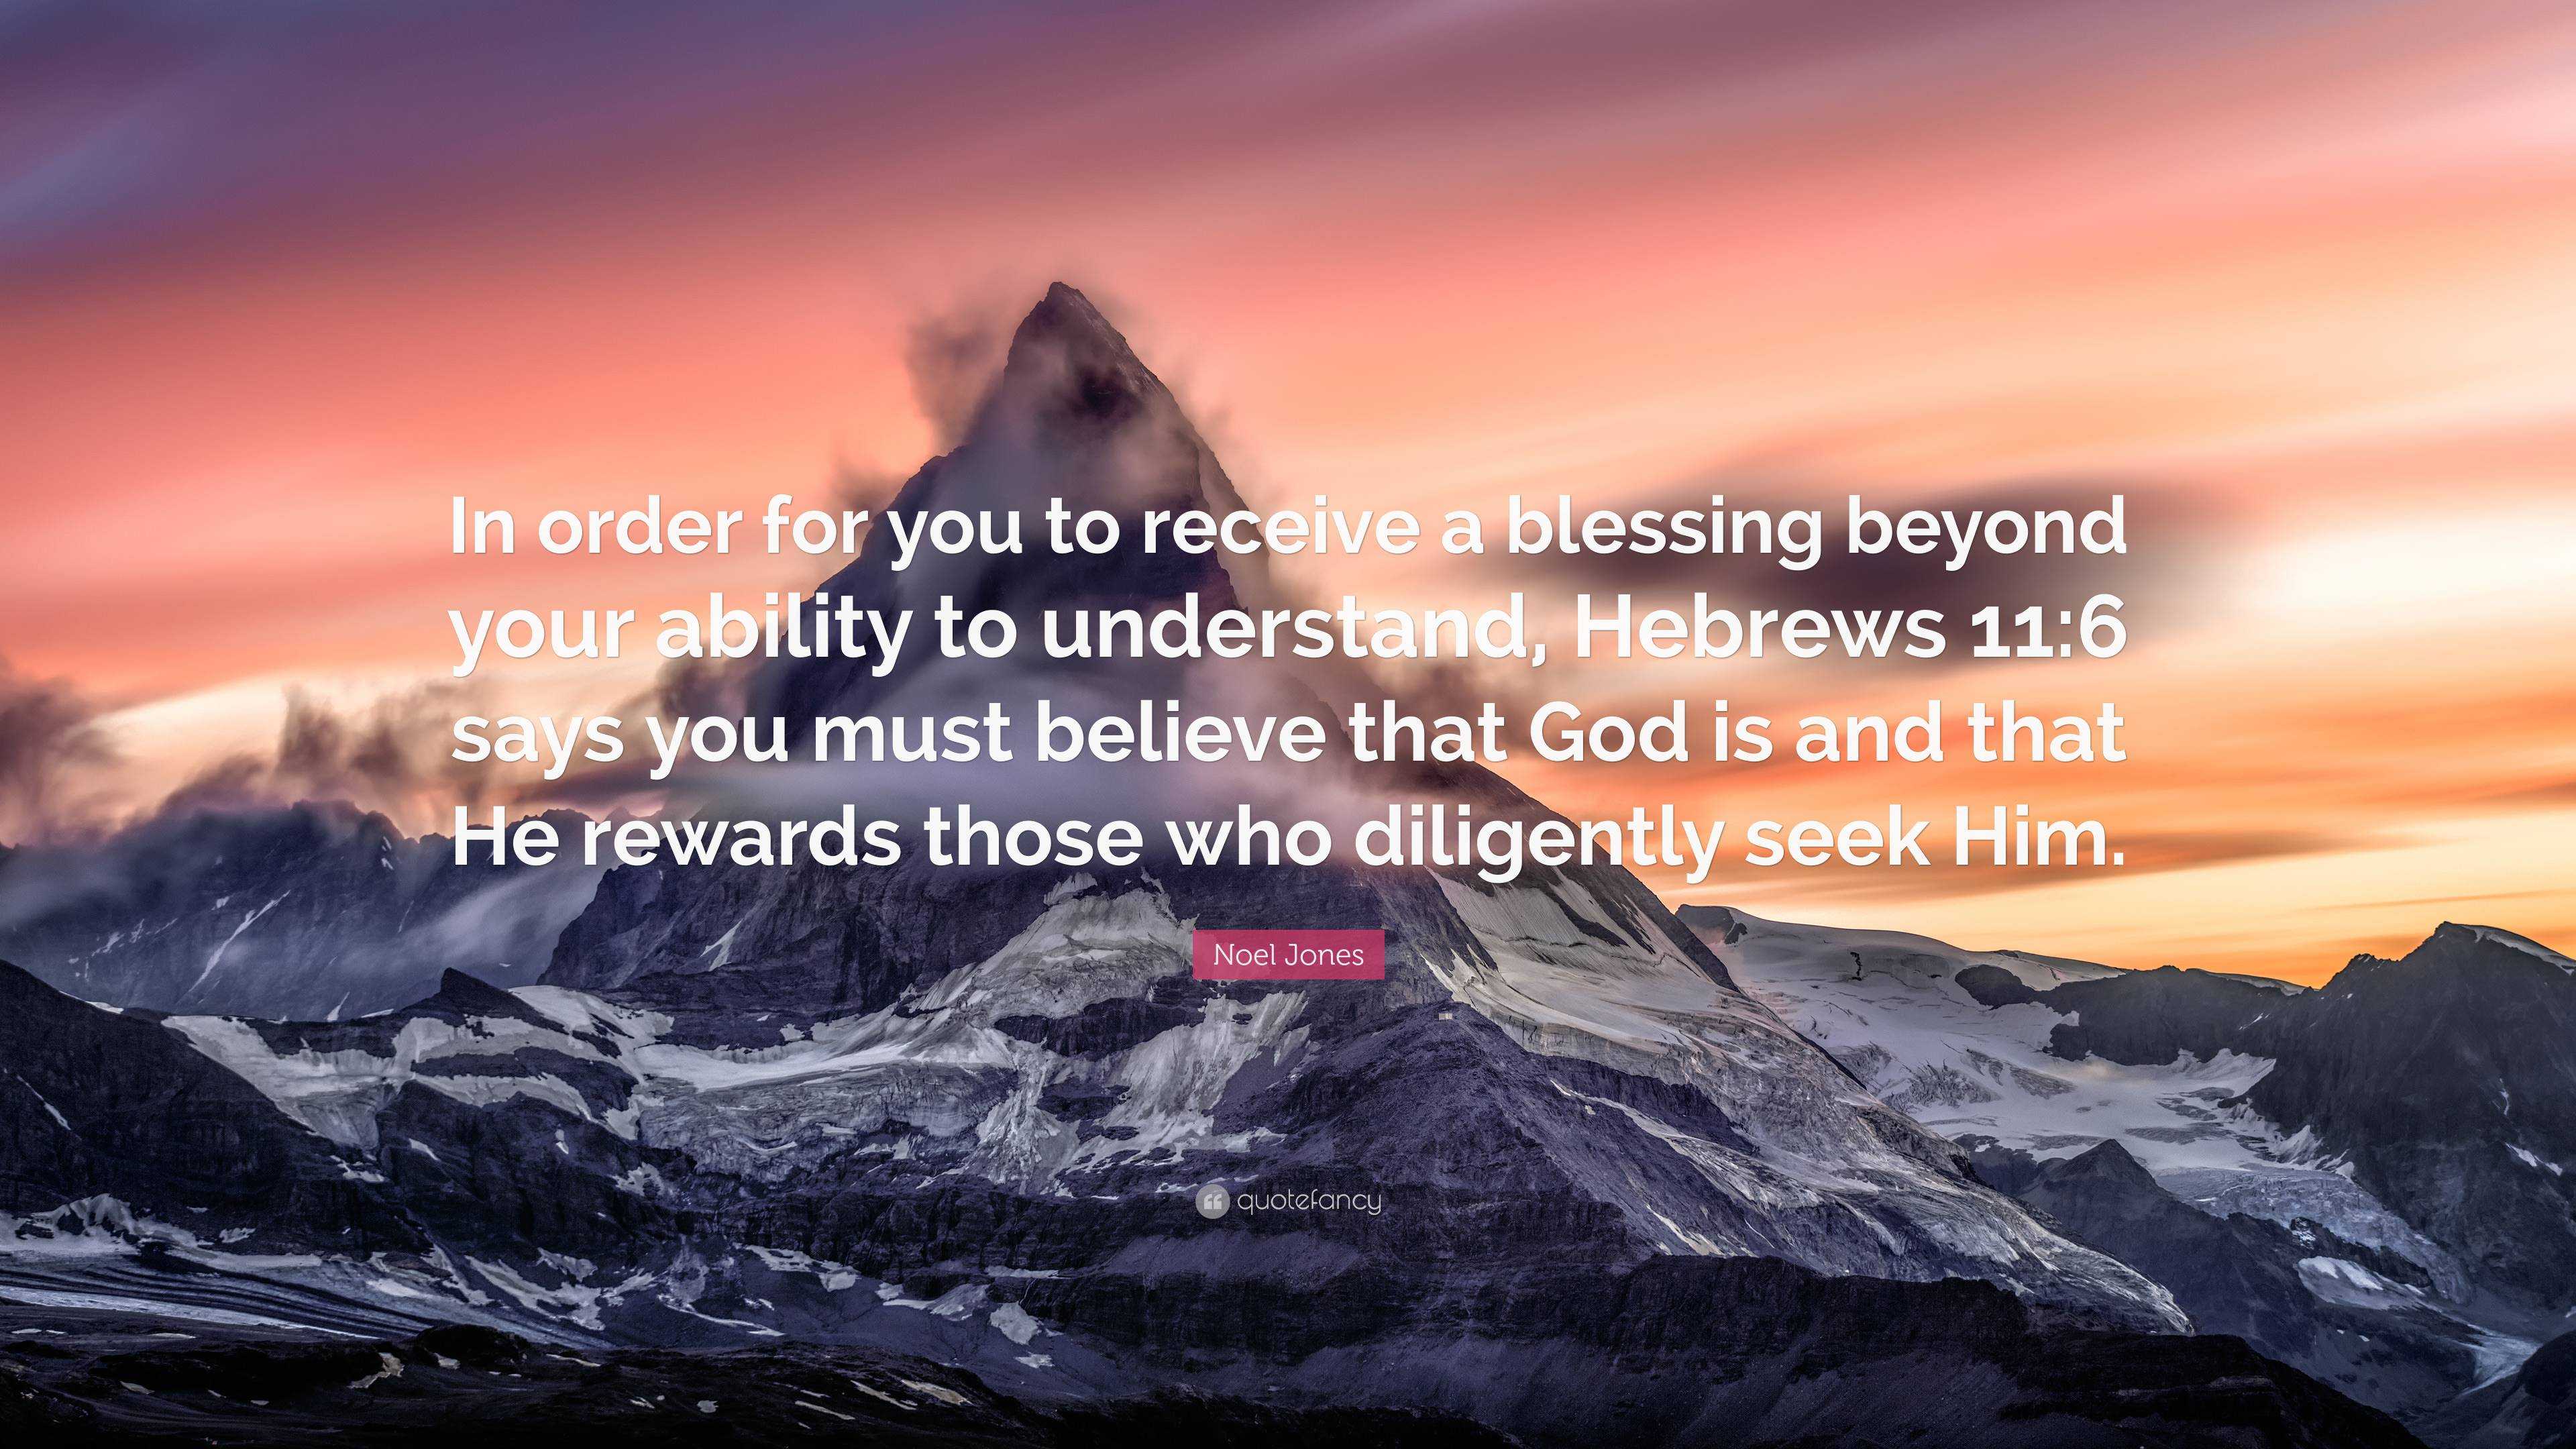 Noel Jones Quote: “In order for you to receive a blessing beyond your  ability to understand, Hebrews 11:6 says you must believe that God is...”